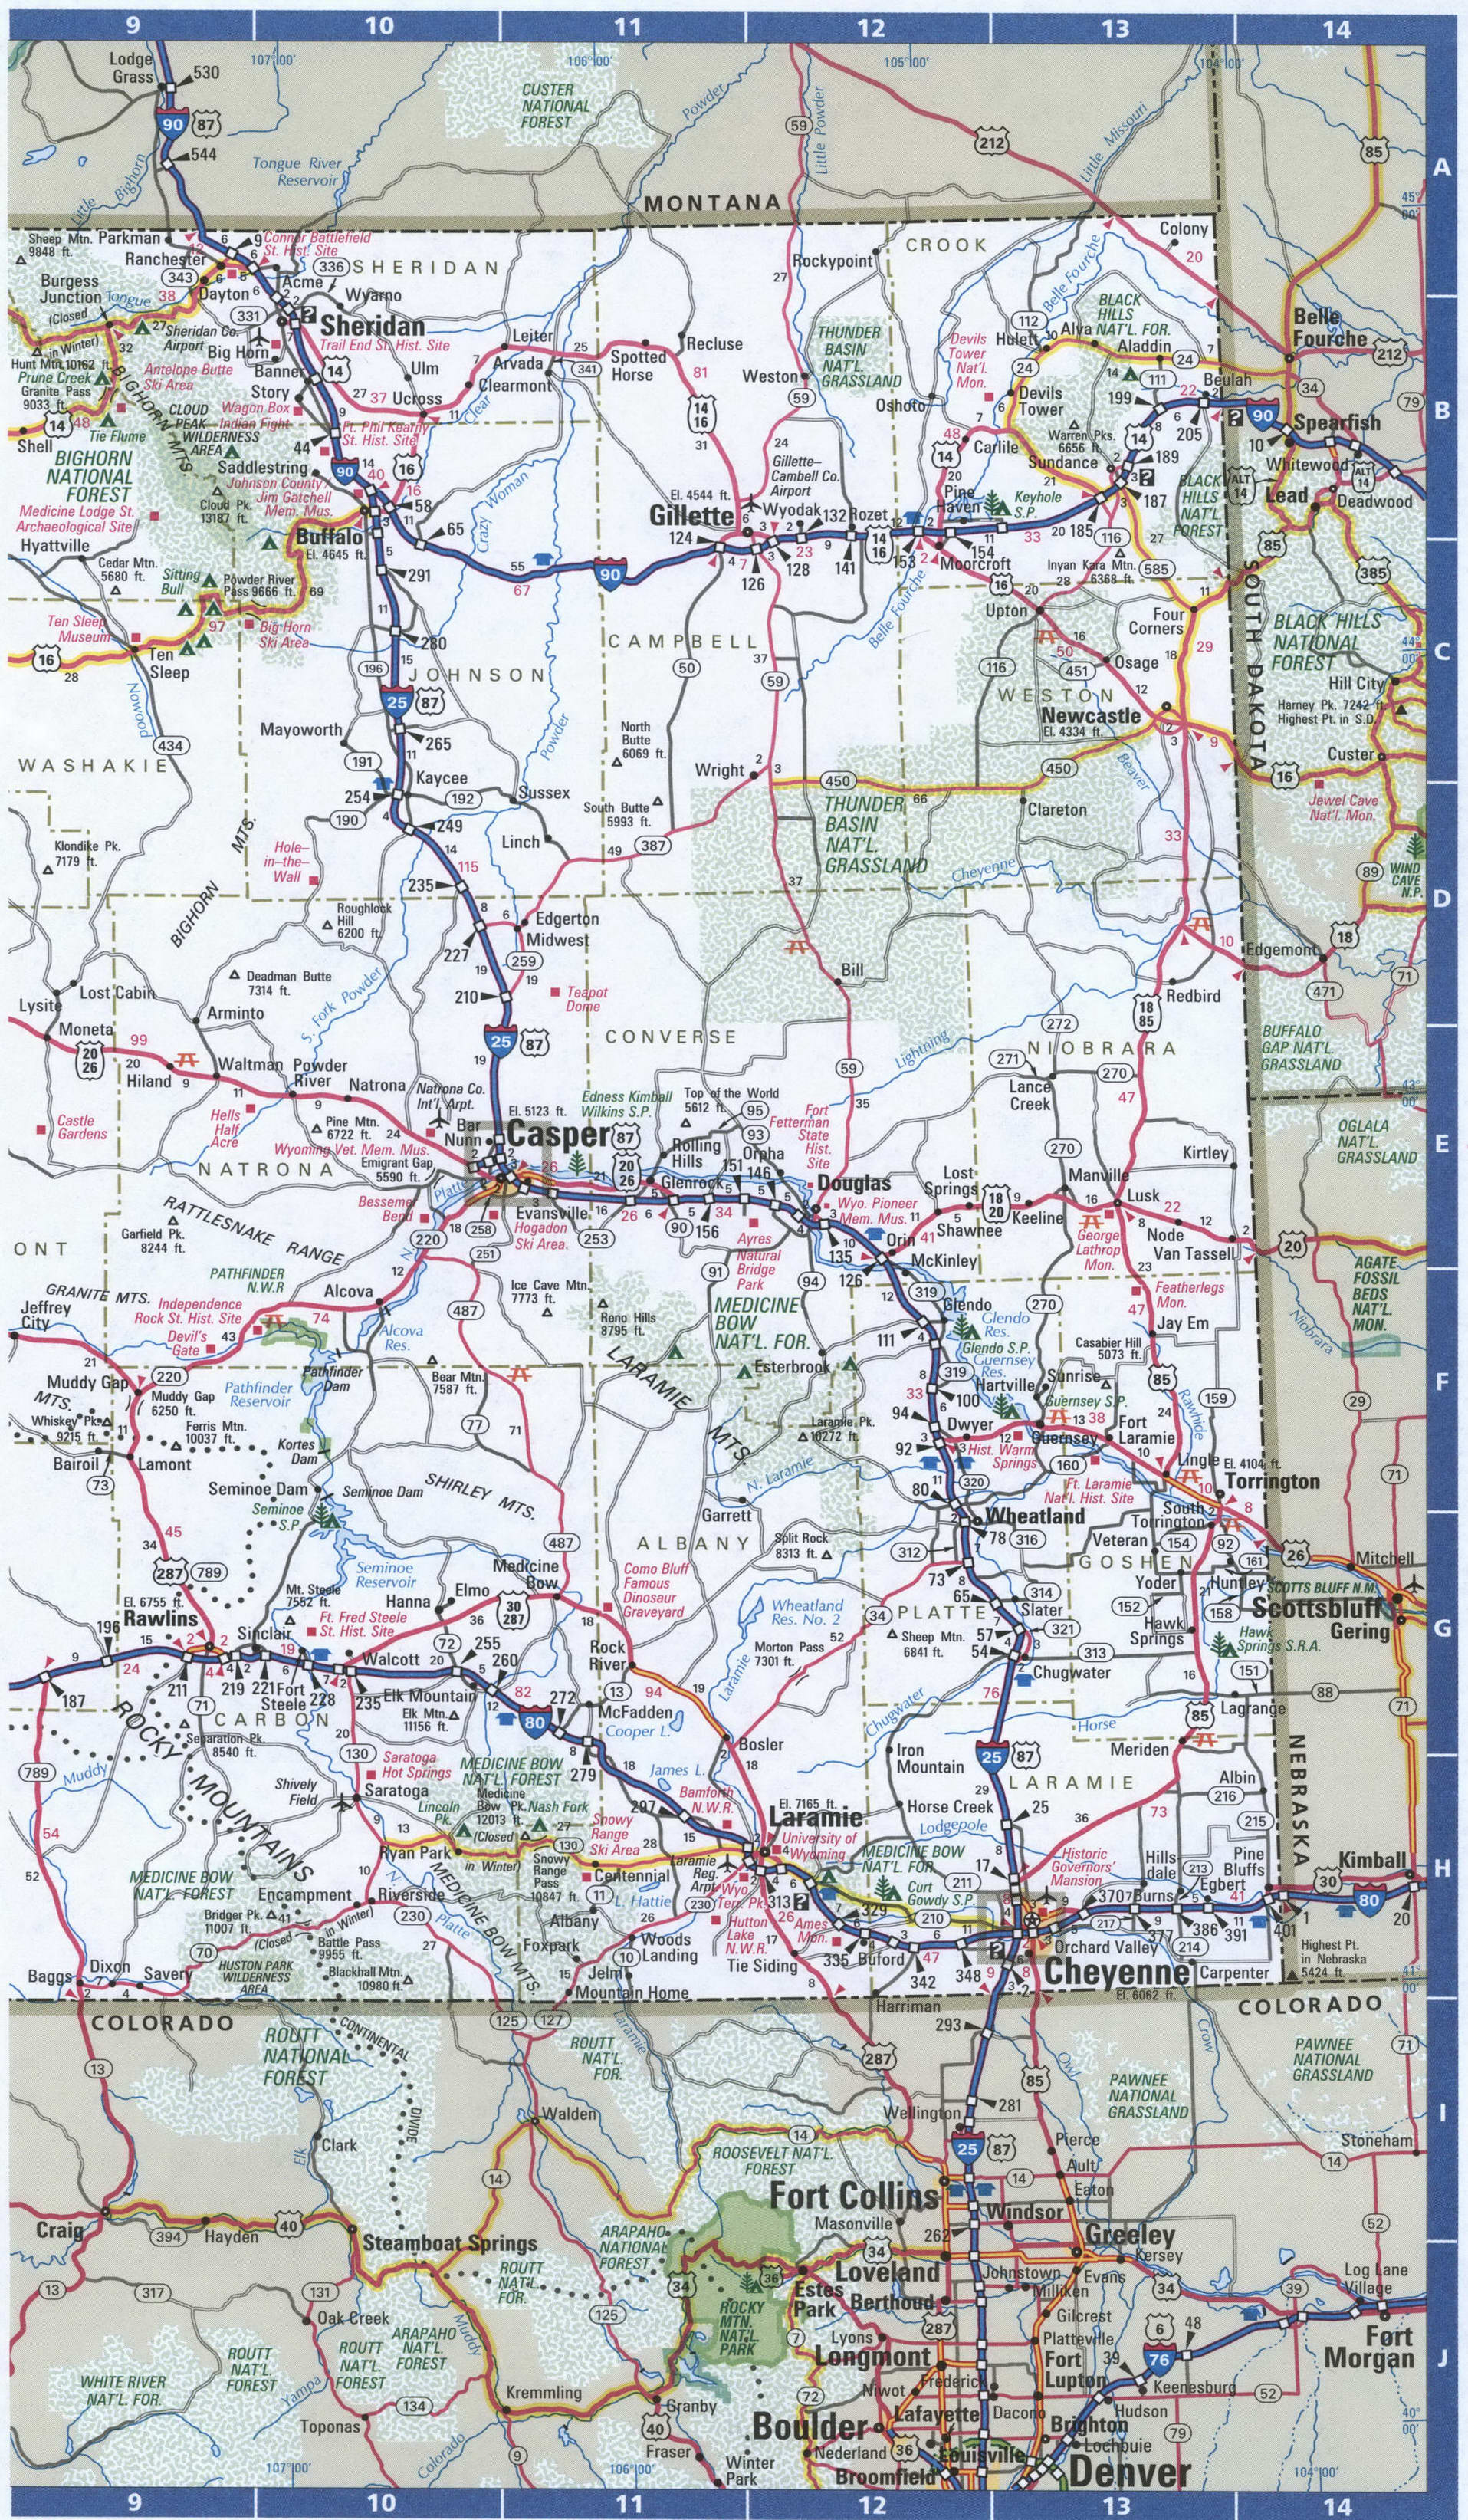 Wyoming large scale highways map